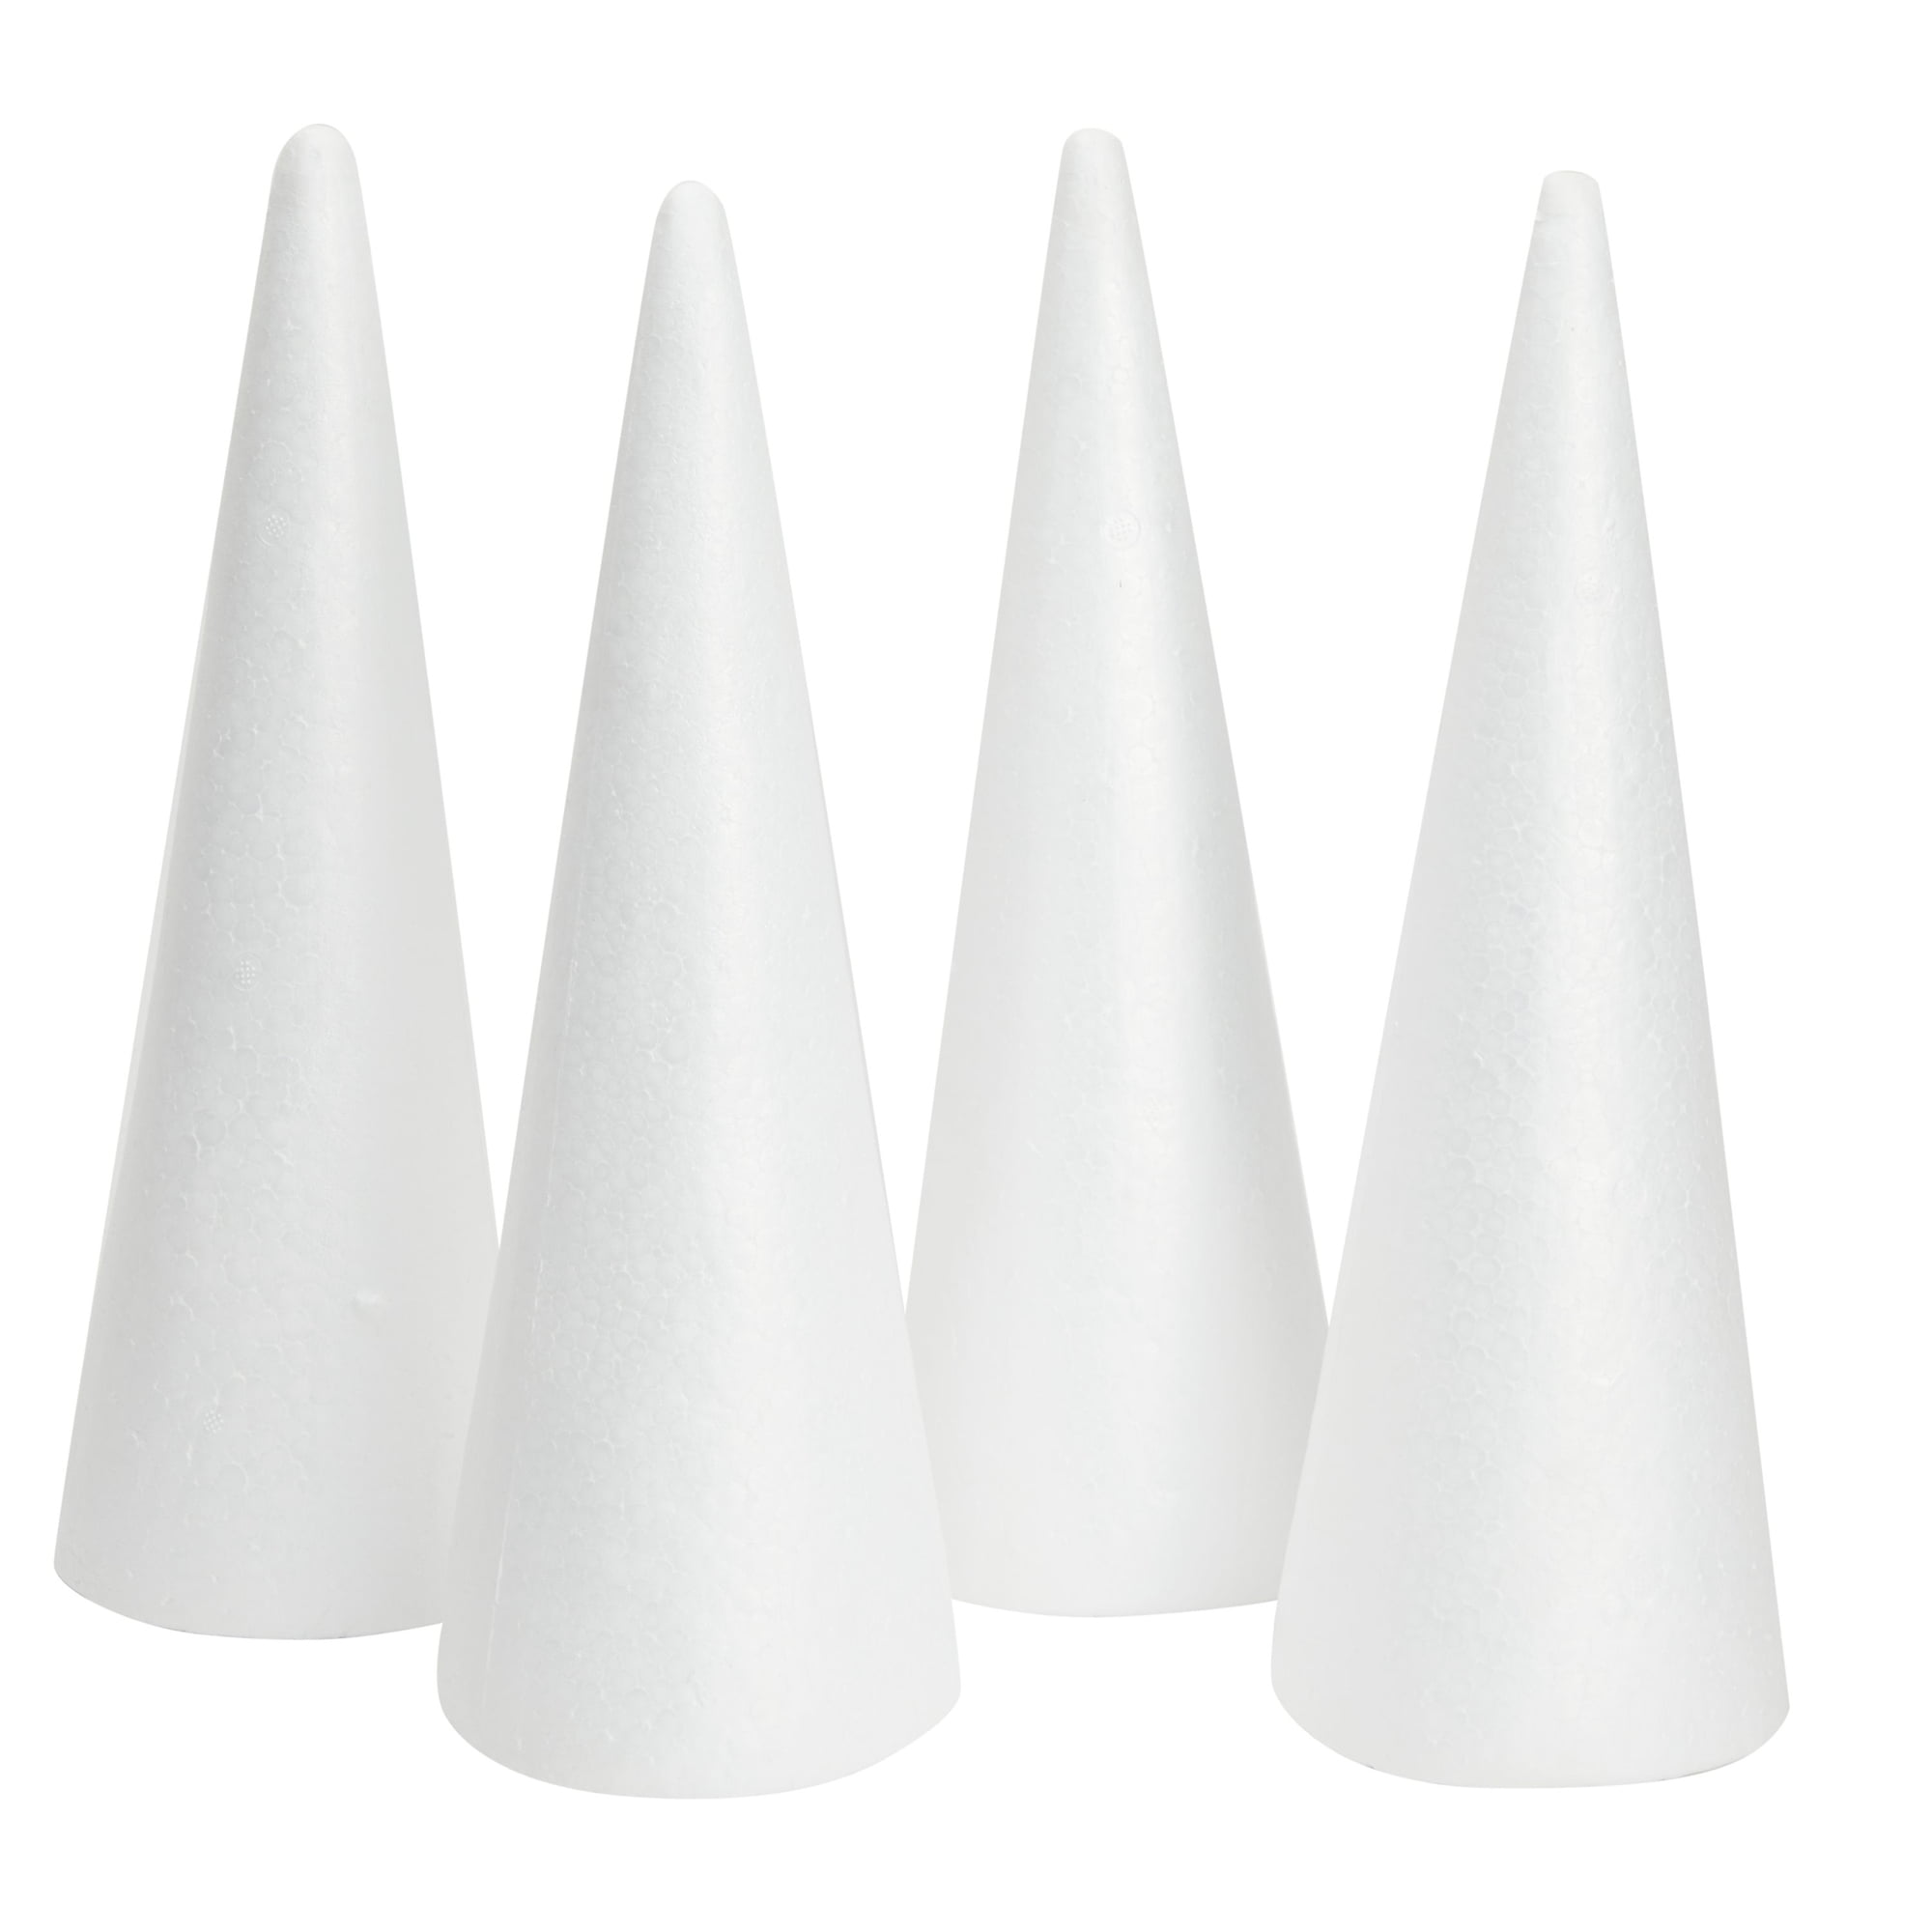 USHOBE 12 Pack Styrofoam Cones for Crafts Foam Tree Cones for DIY Crafts  White Foam Cone Styrofoam Polystyrene Cone Shapes Crafts for Home Party